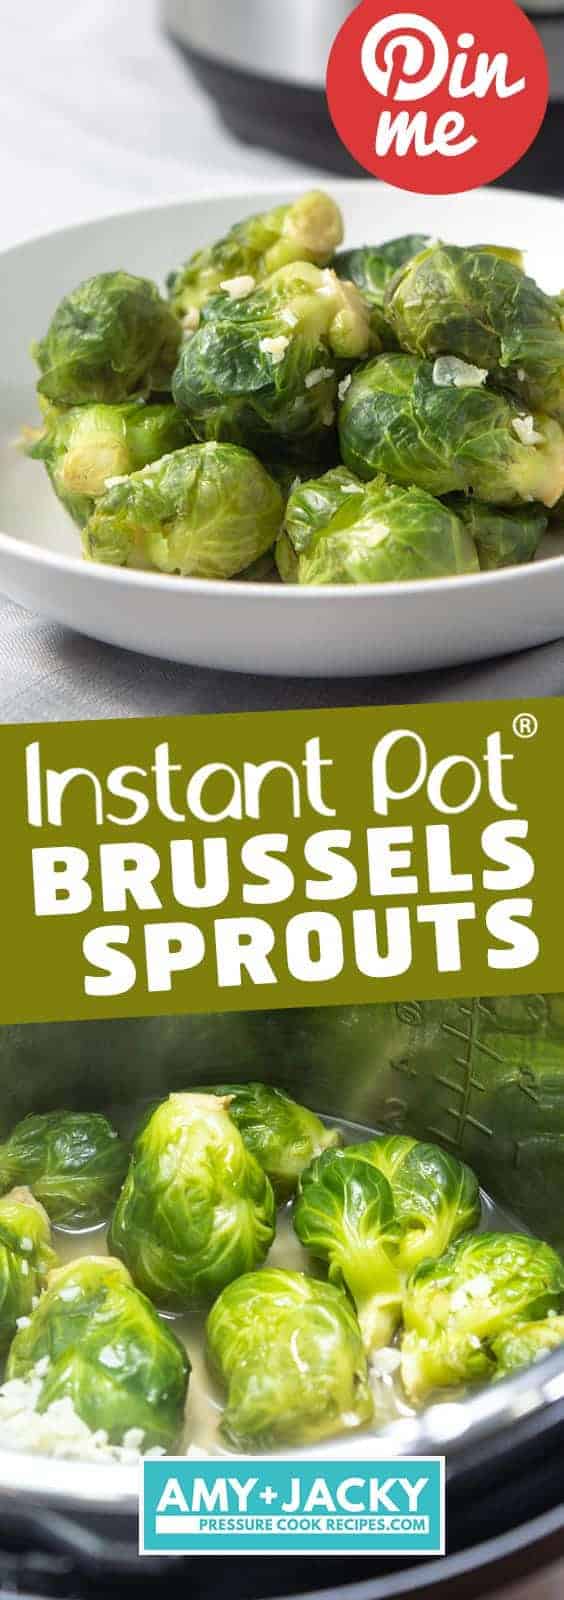 Instant Pot Brussels Sprouts | Pressure Cooker Brussels Sprouts | Instapot Brussel Sprouts | Instant Pot Vegetables | Instant Pot Side Dishes | Instant Pot Vegetarian | Instant Pot Recipes #instantpot #vegetables #easy #healthy #side